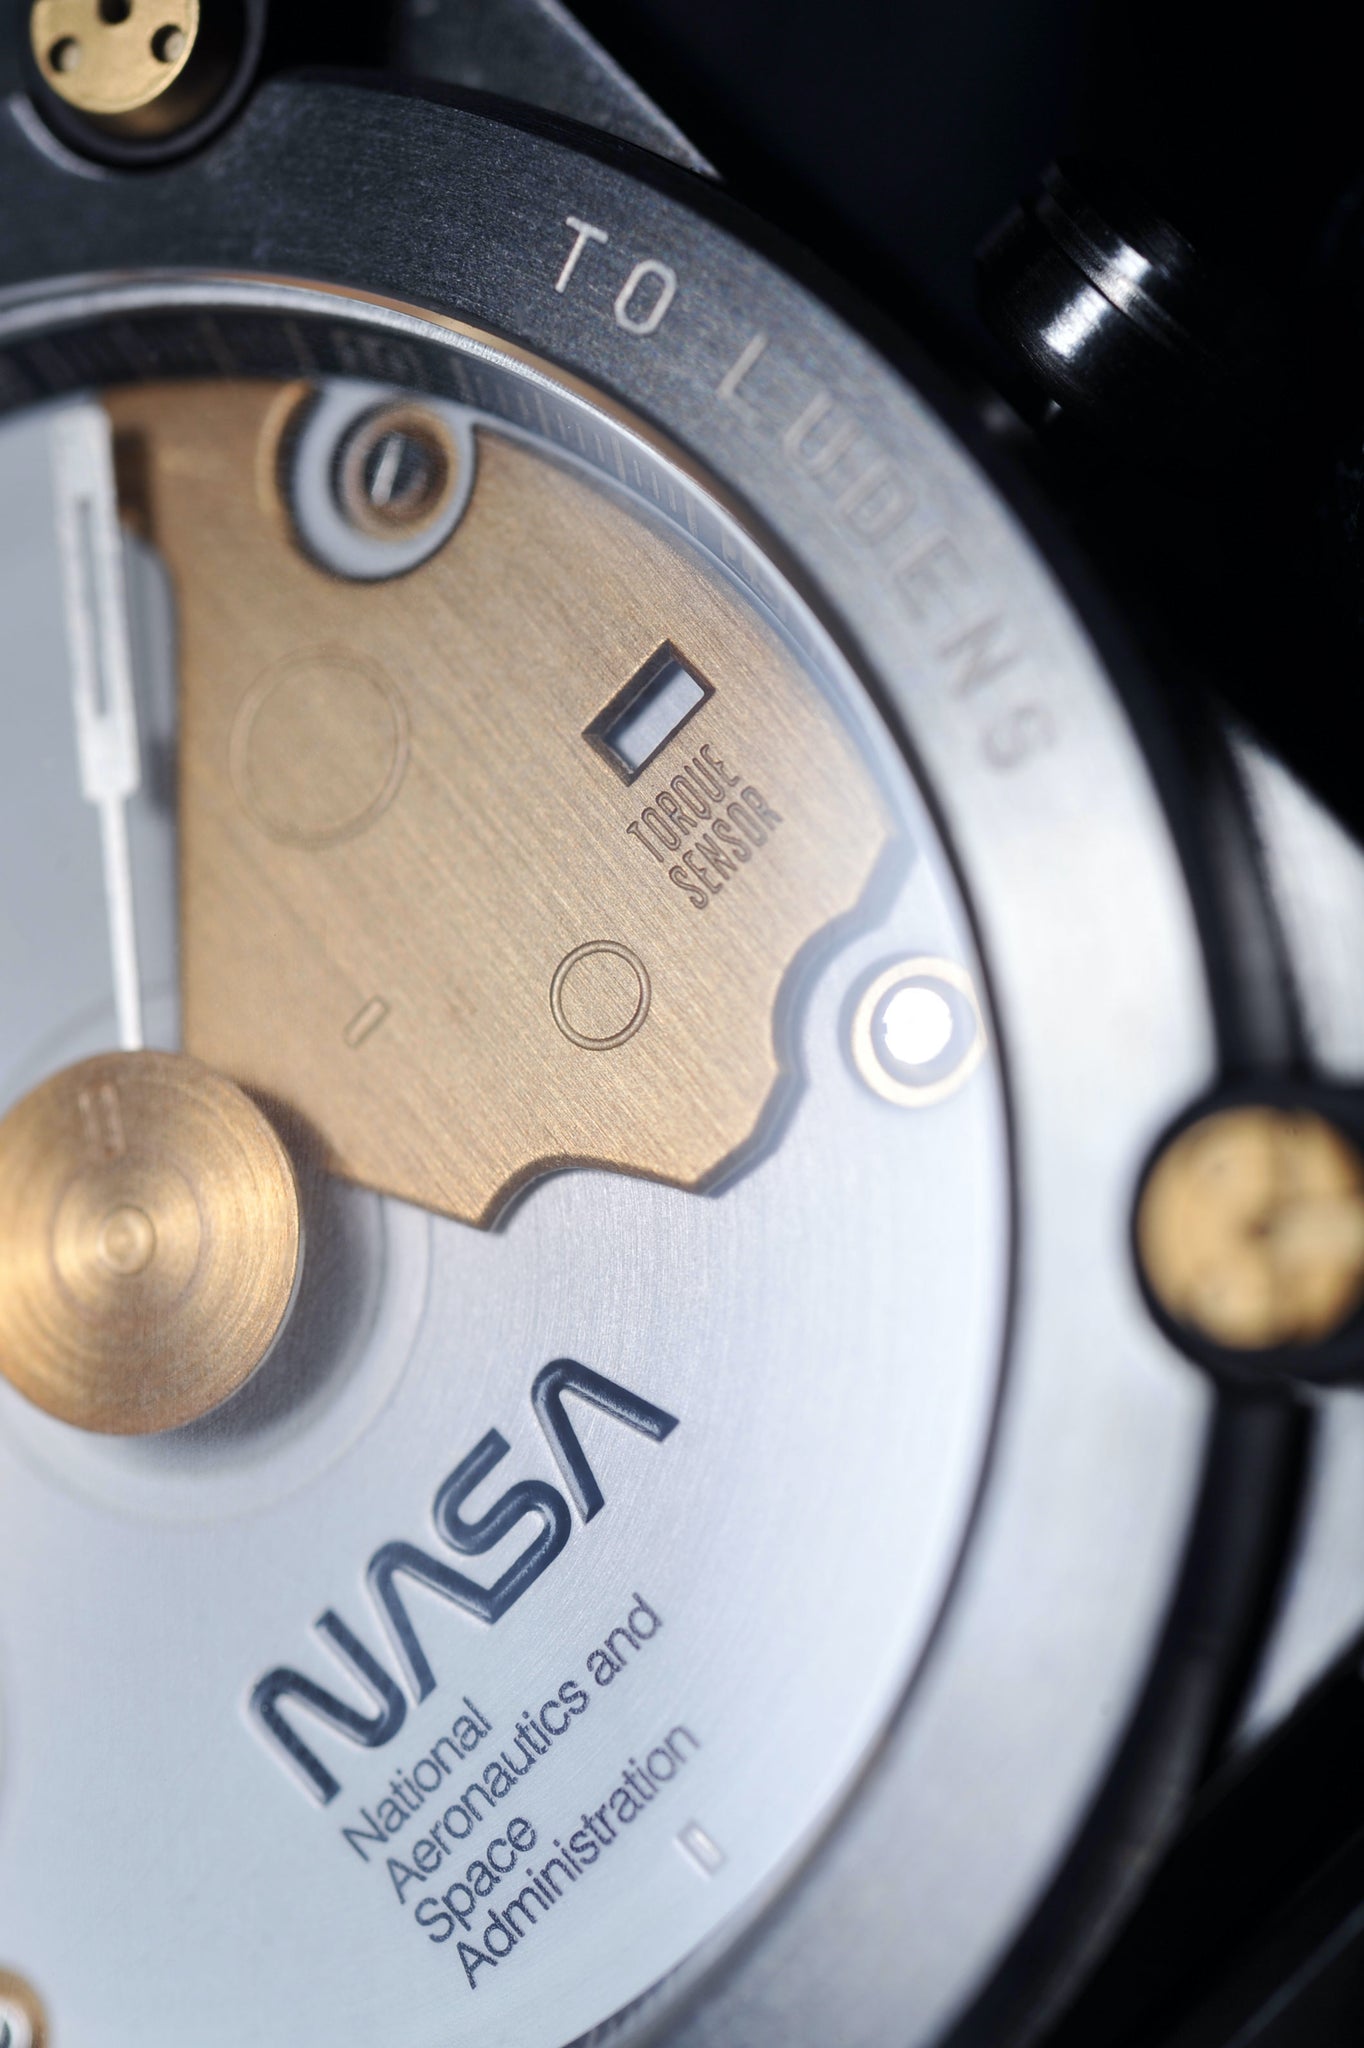 On the dial is the endorsement of the NASA logo, as well as an engraved serial code that appeared on the arms of the Ludens EVA Creasuit Suit. 